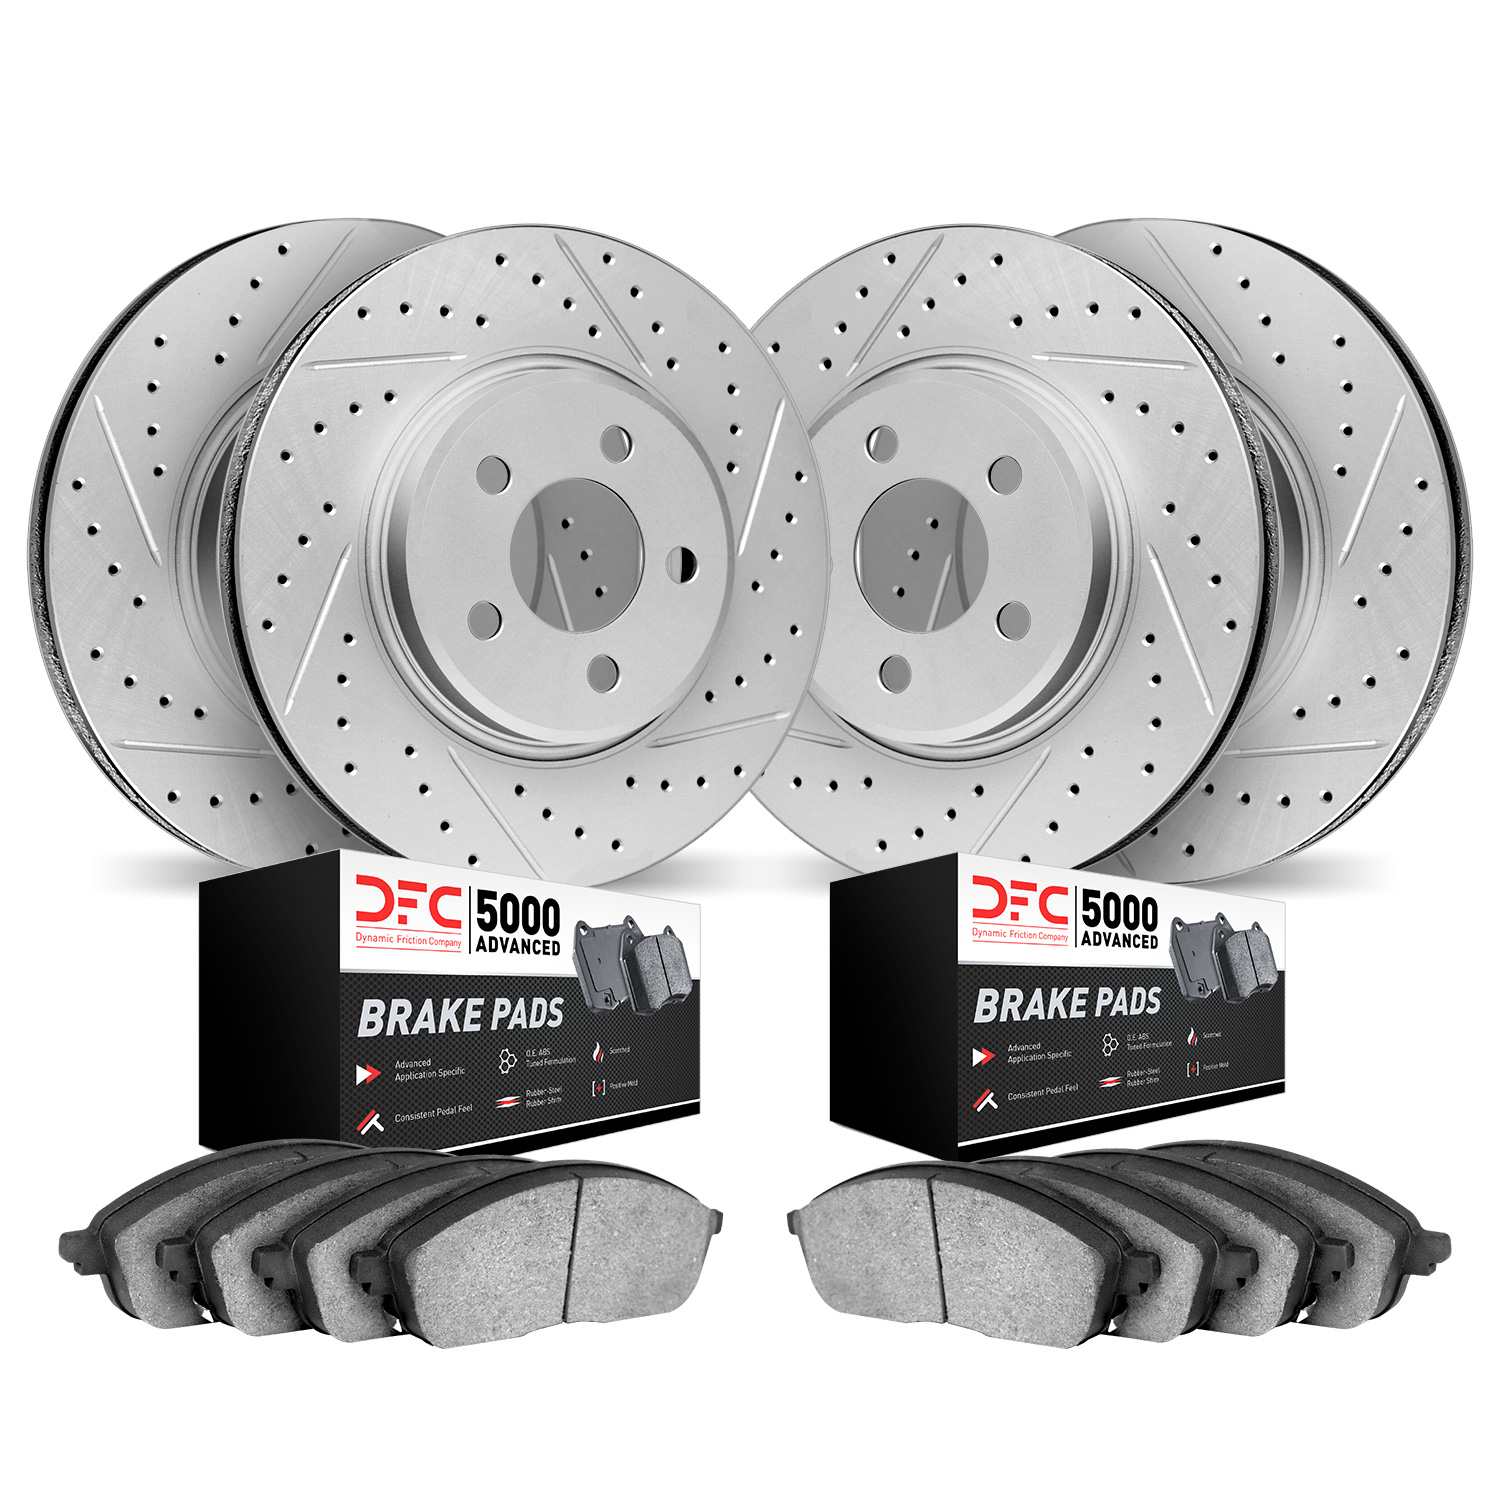 2504-54218 Geoperformance Drilled/Slotted Rotors w/5000 Advanced Brake Pads Kit, 2004-2007 Ford/Lincoln/Mercury/Mazda, Position: